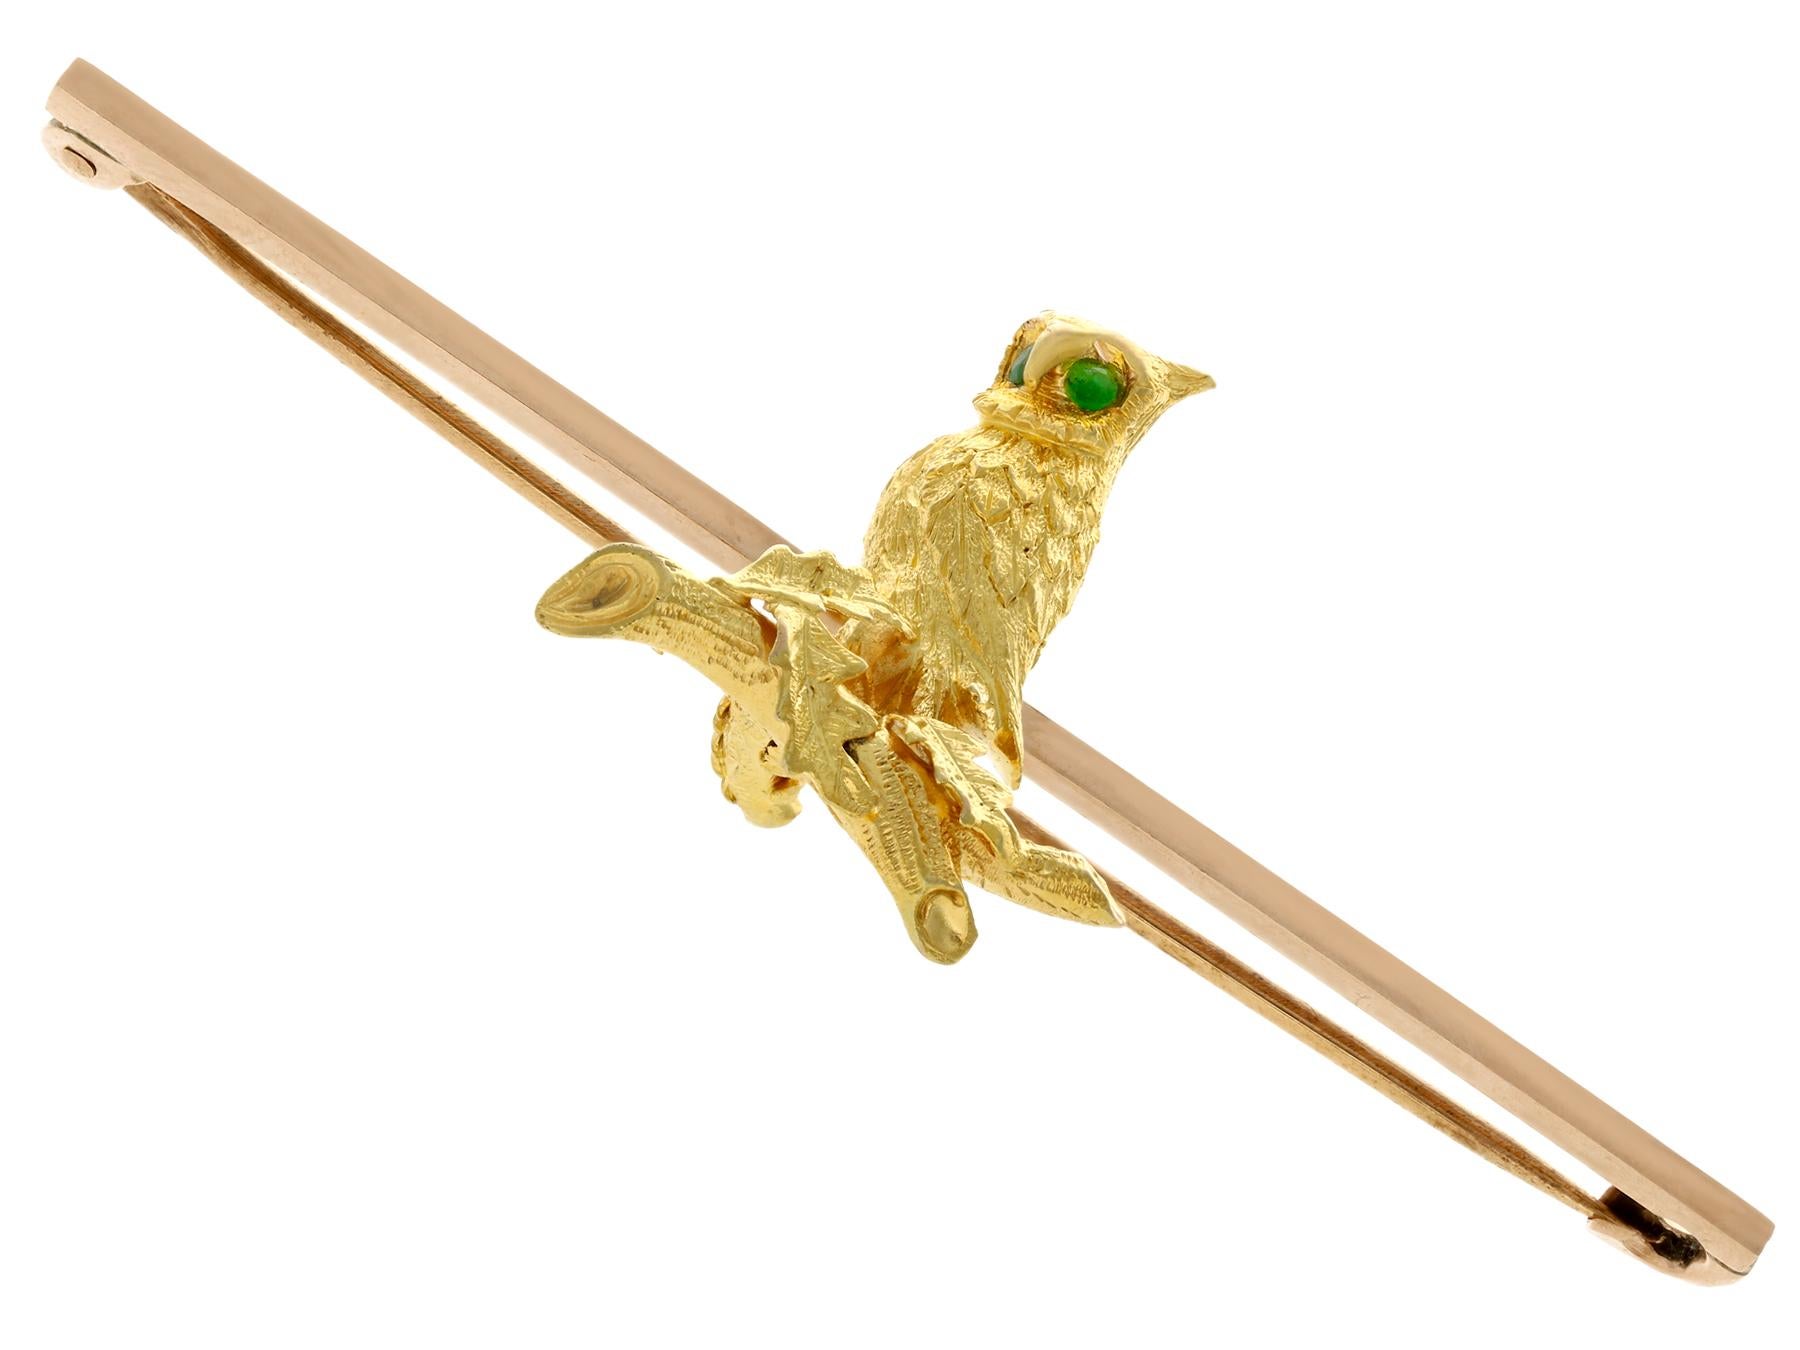 An impressive antique 1890's 0.06 carat emerald and 15 karat yellow gold, 9 karat rose gold and copper 'owl' bar brooch; part of our diverse antique  and estate jewelry collections.

This fine and impressive antique brooch has been crafted in 15k